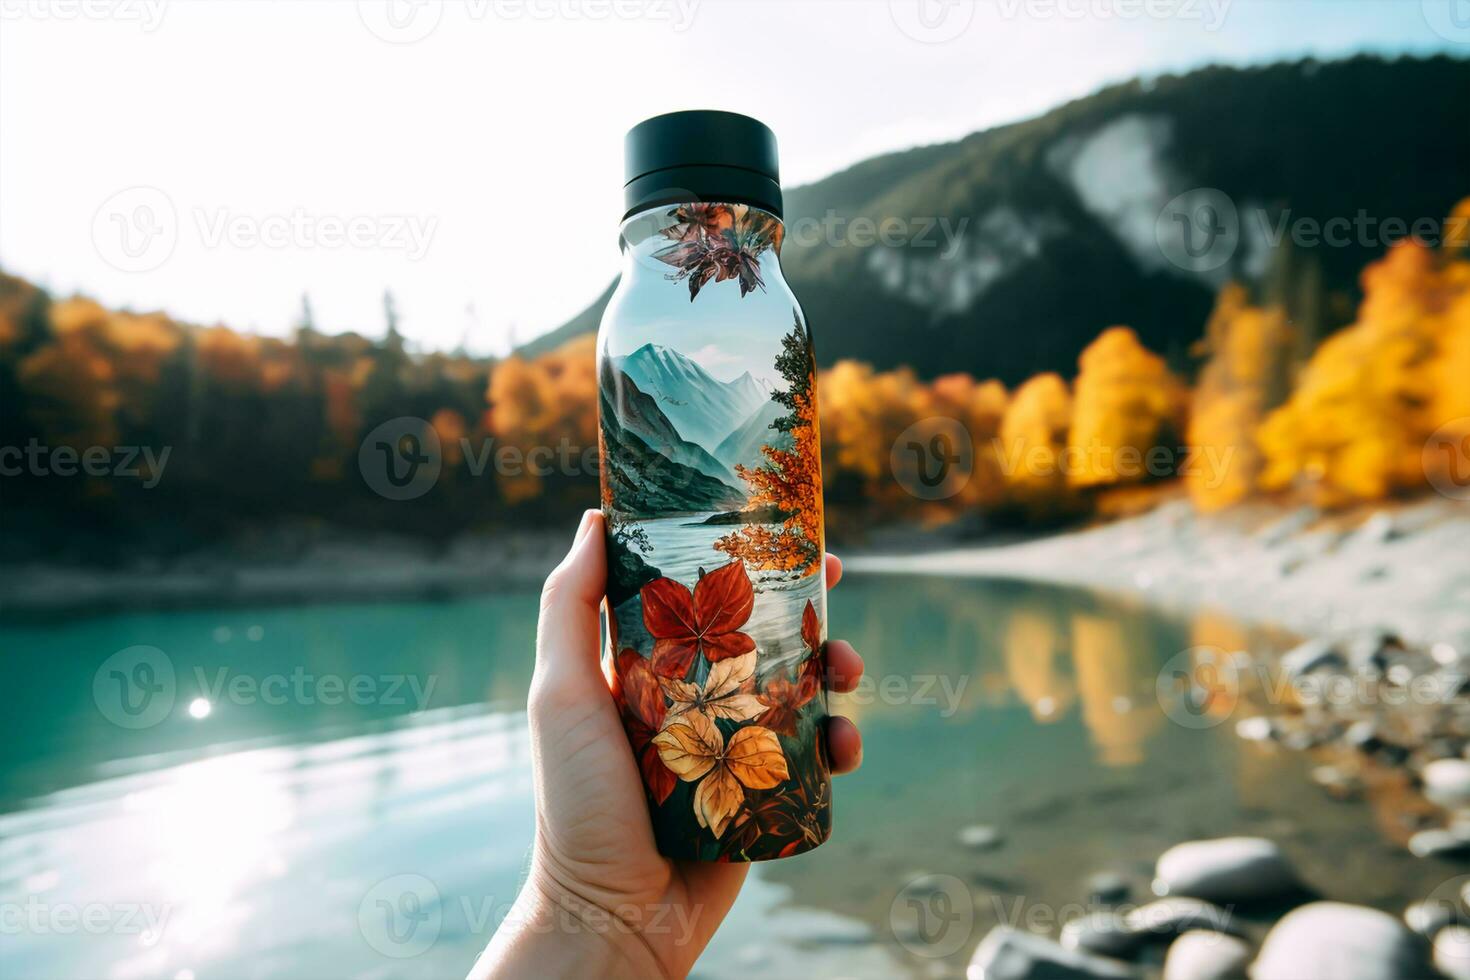 Female hand holding a bottle of water on the background of mountains and lake photo